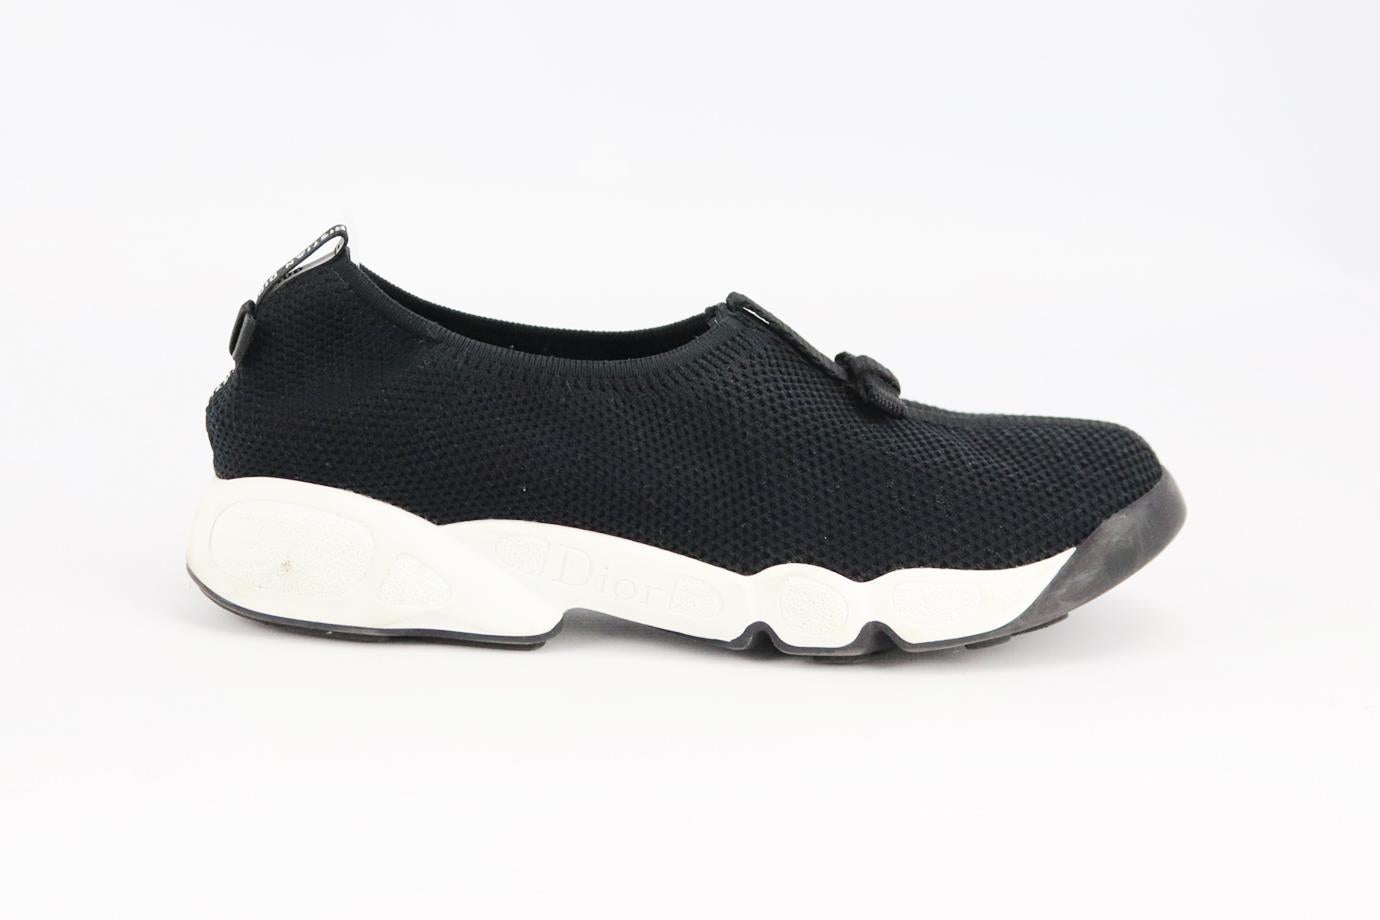 Christian Dior Fusion stretch knit sneakers. Black and white. Pull on. Does not come with box or dustbag. Size: EU 36.5 (UK 3.5, US 6.5). Insole: 9.1 in. Heel: 1.3 in
